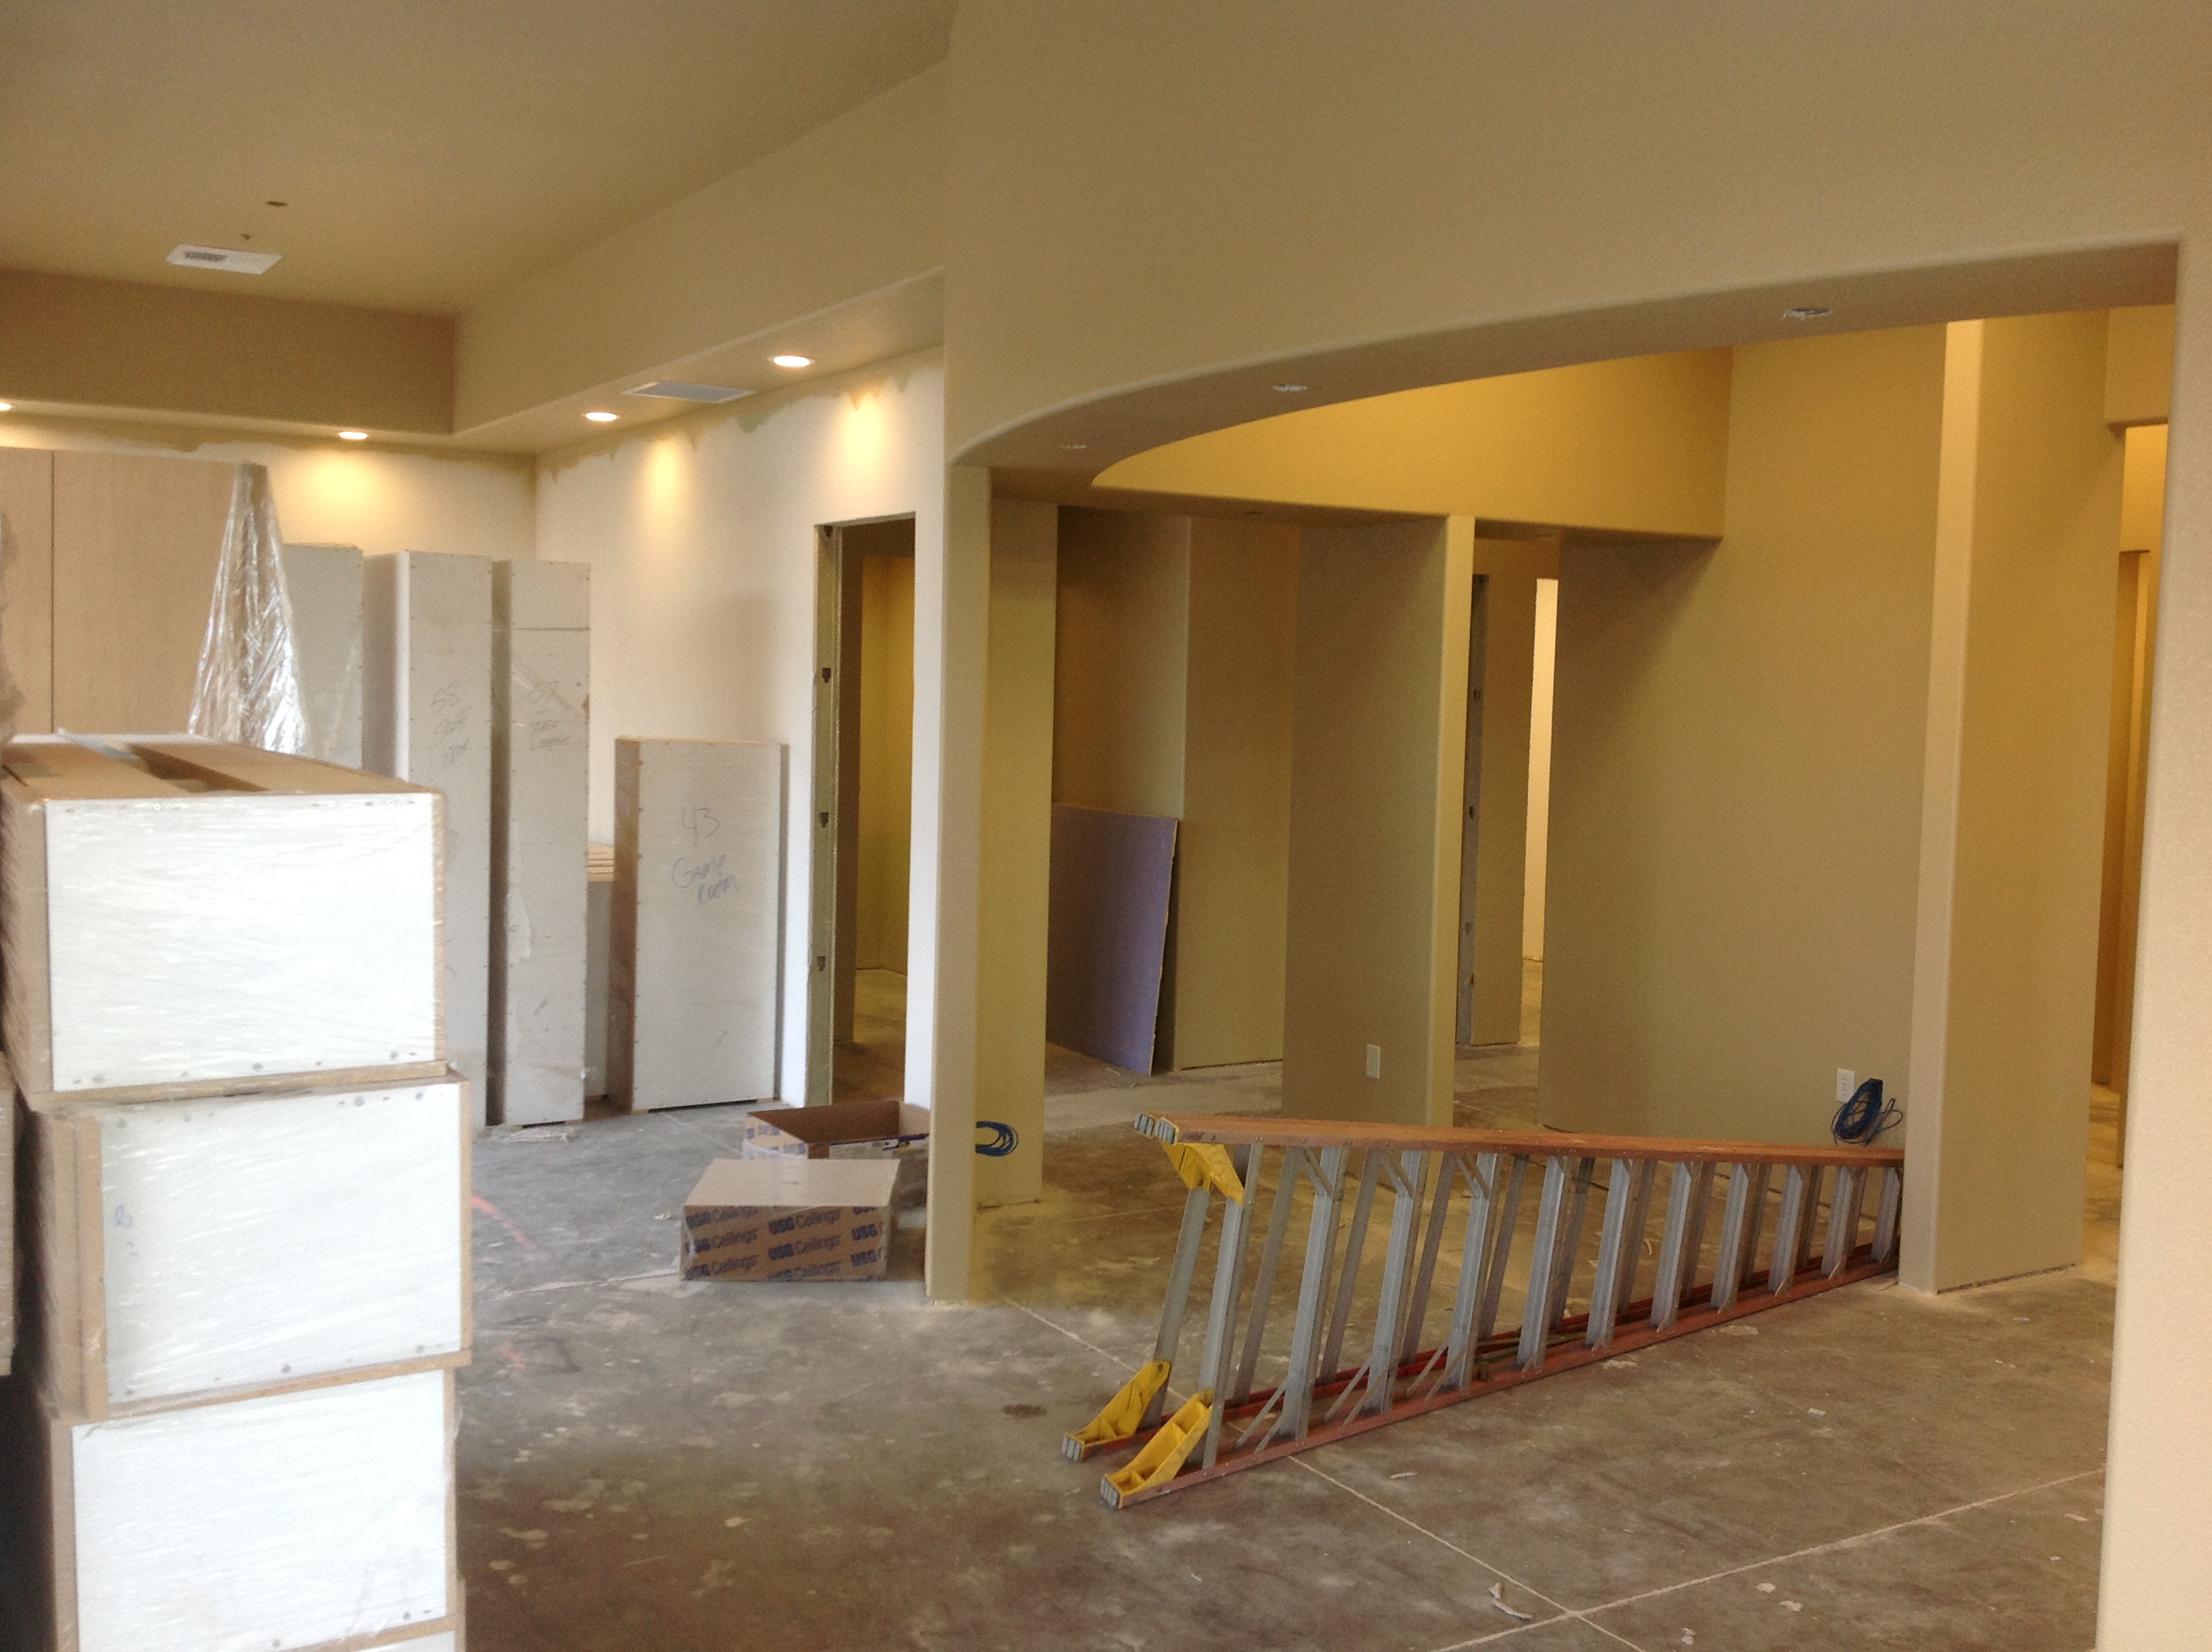 The new Kids Care Dental Roseville office will be open in August 2013